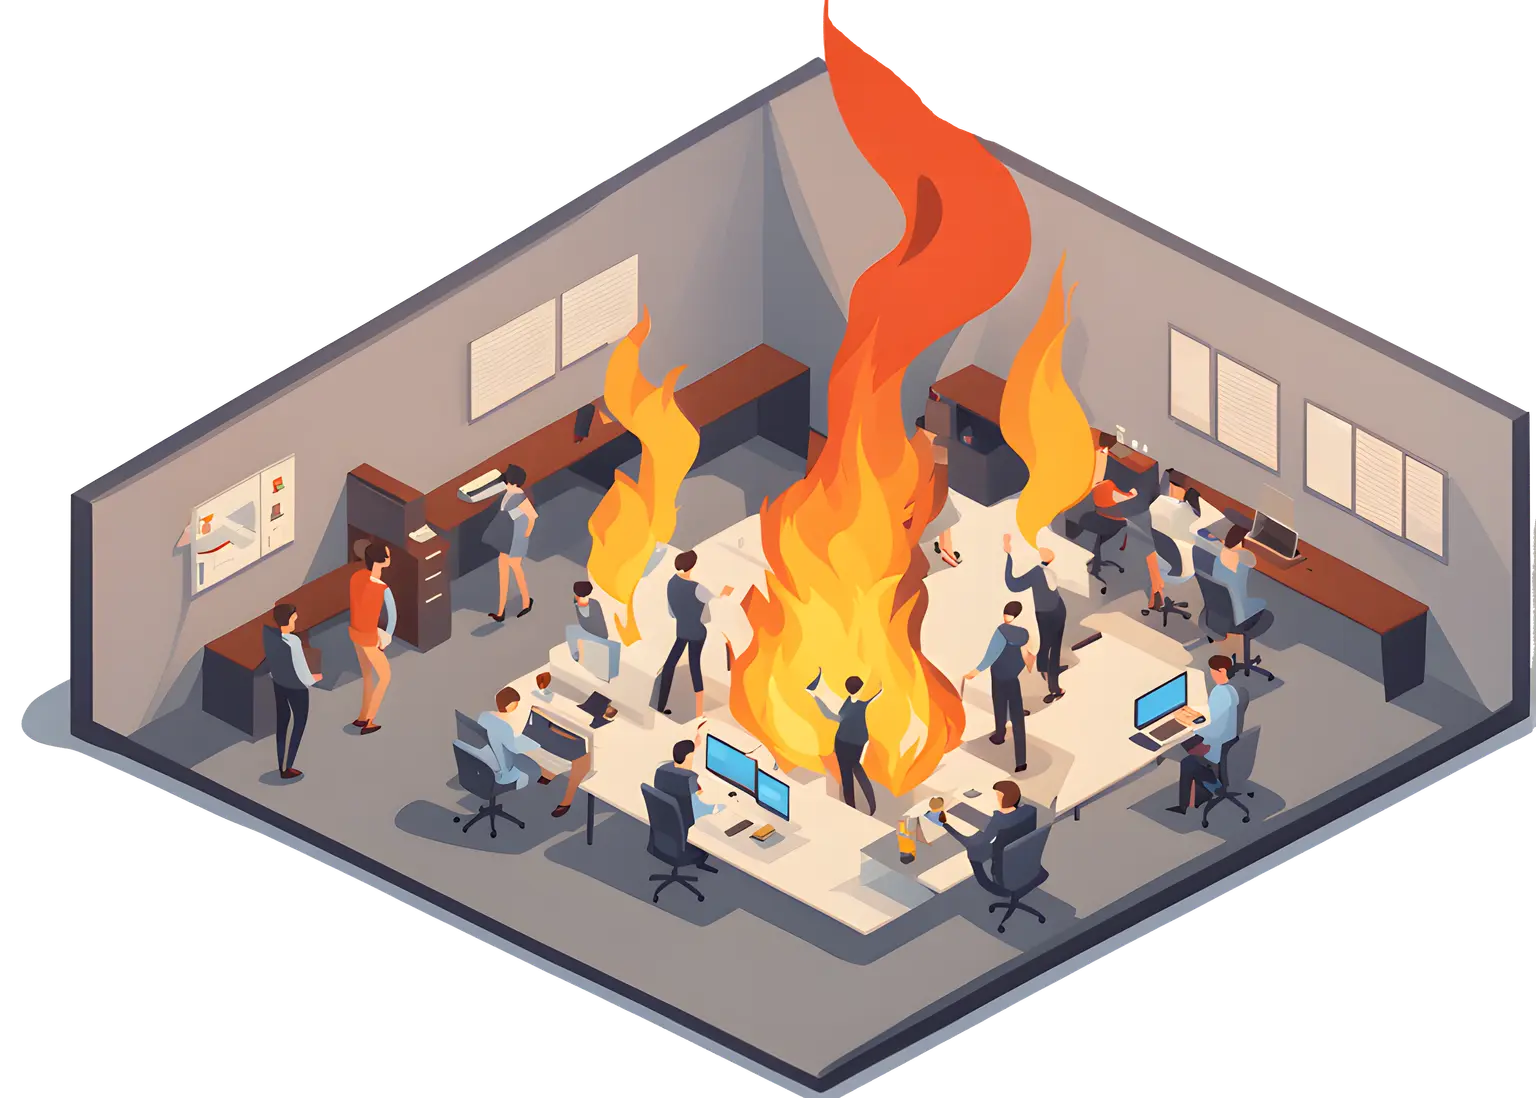 A group of people standing around a fire in an office